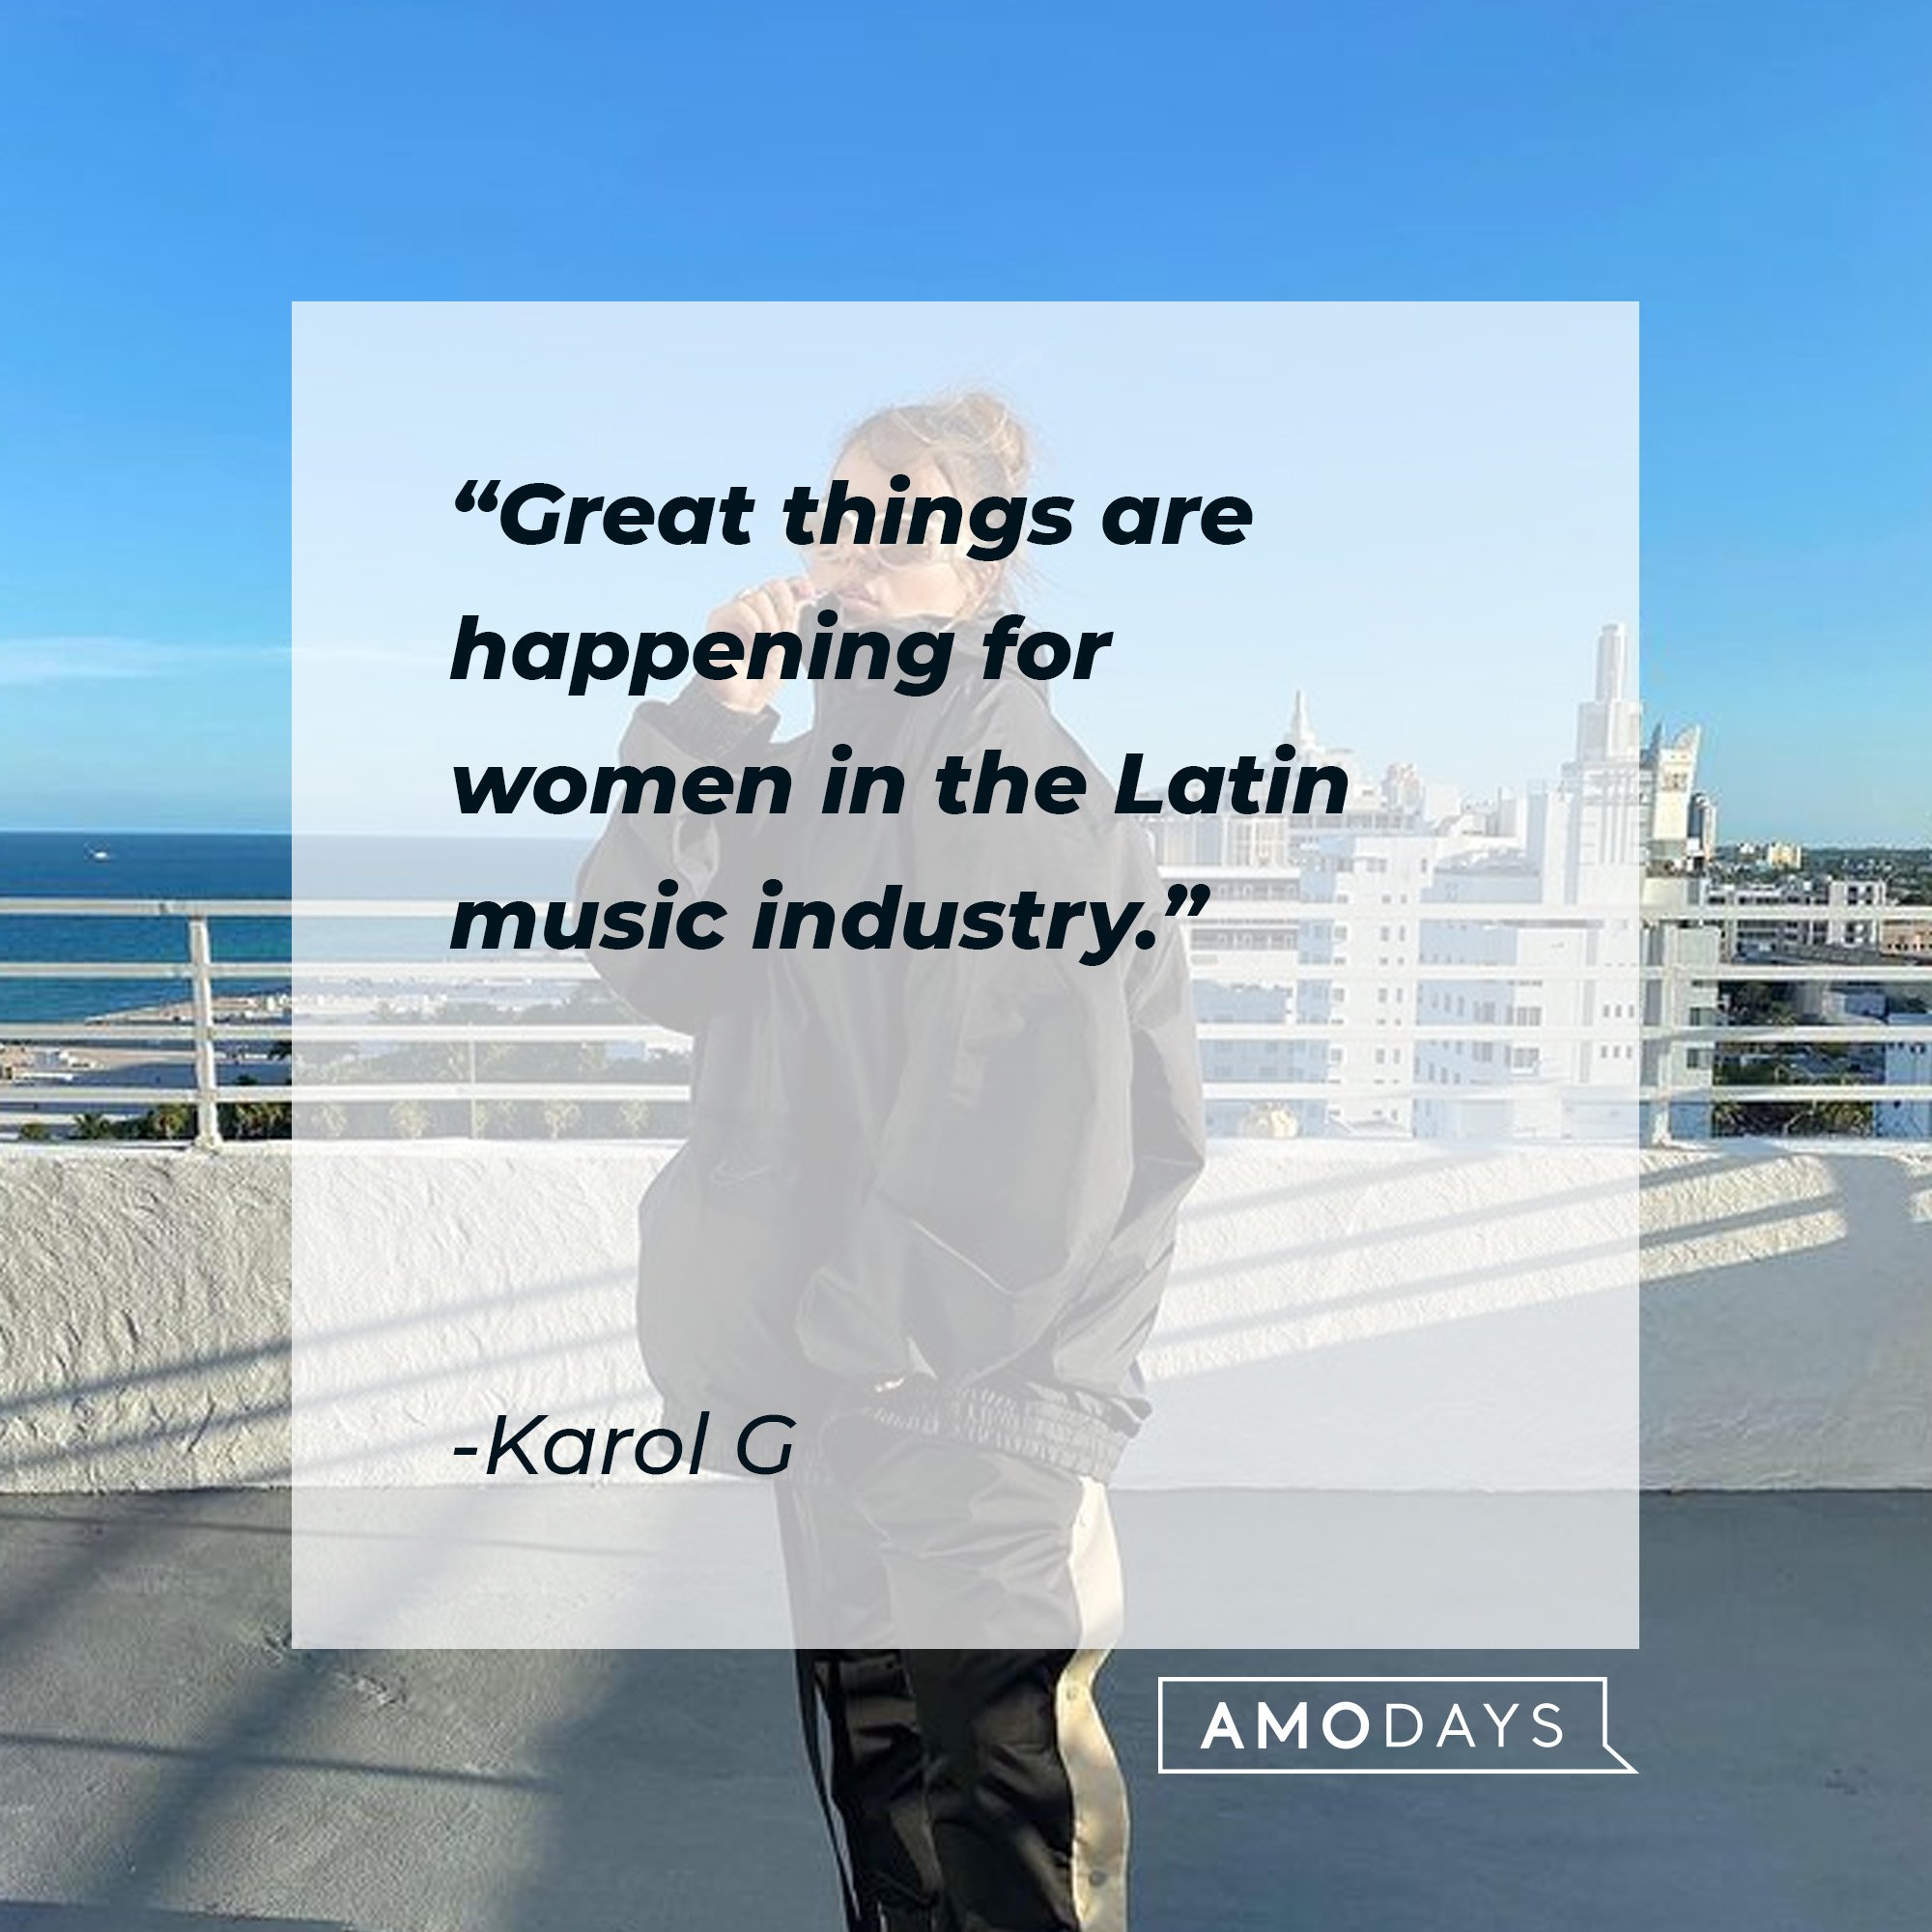  Karol G’s quote: "Great things are happening for women in the Latin music industry." | Image: AmoDays